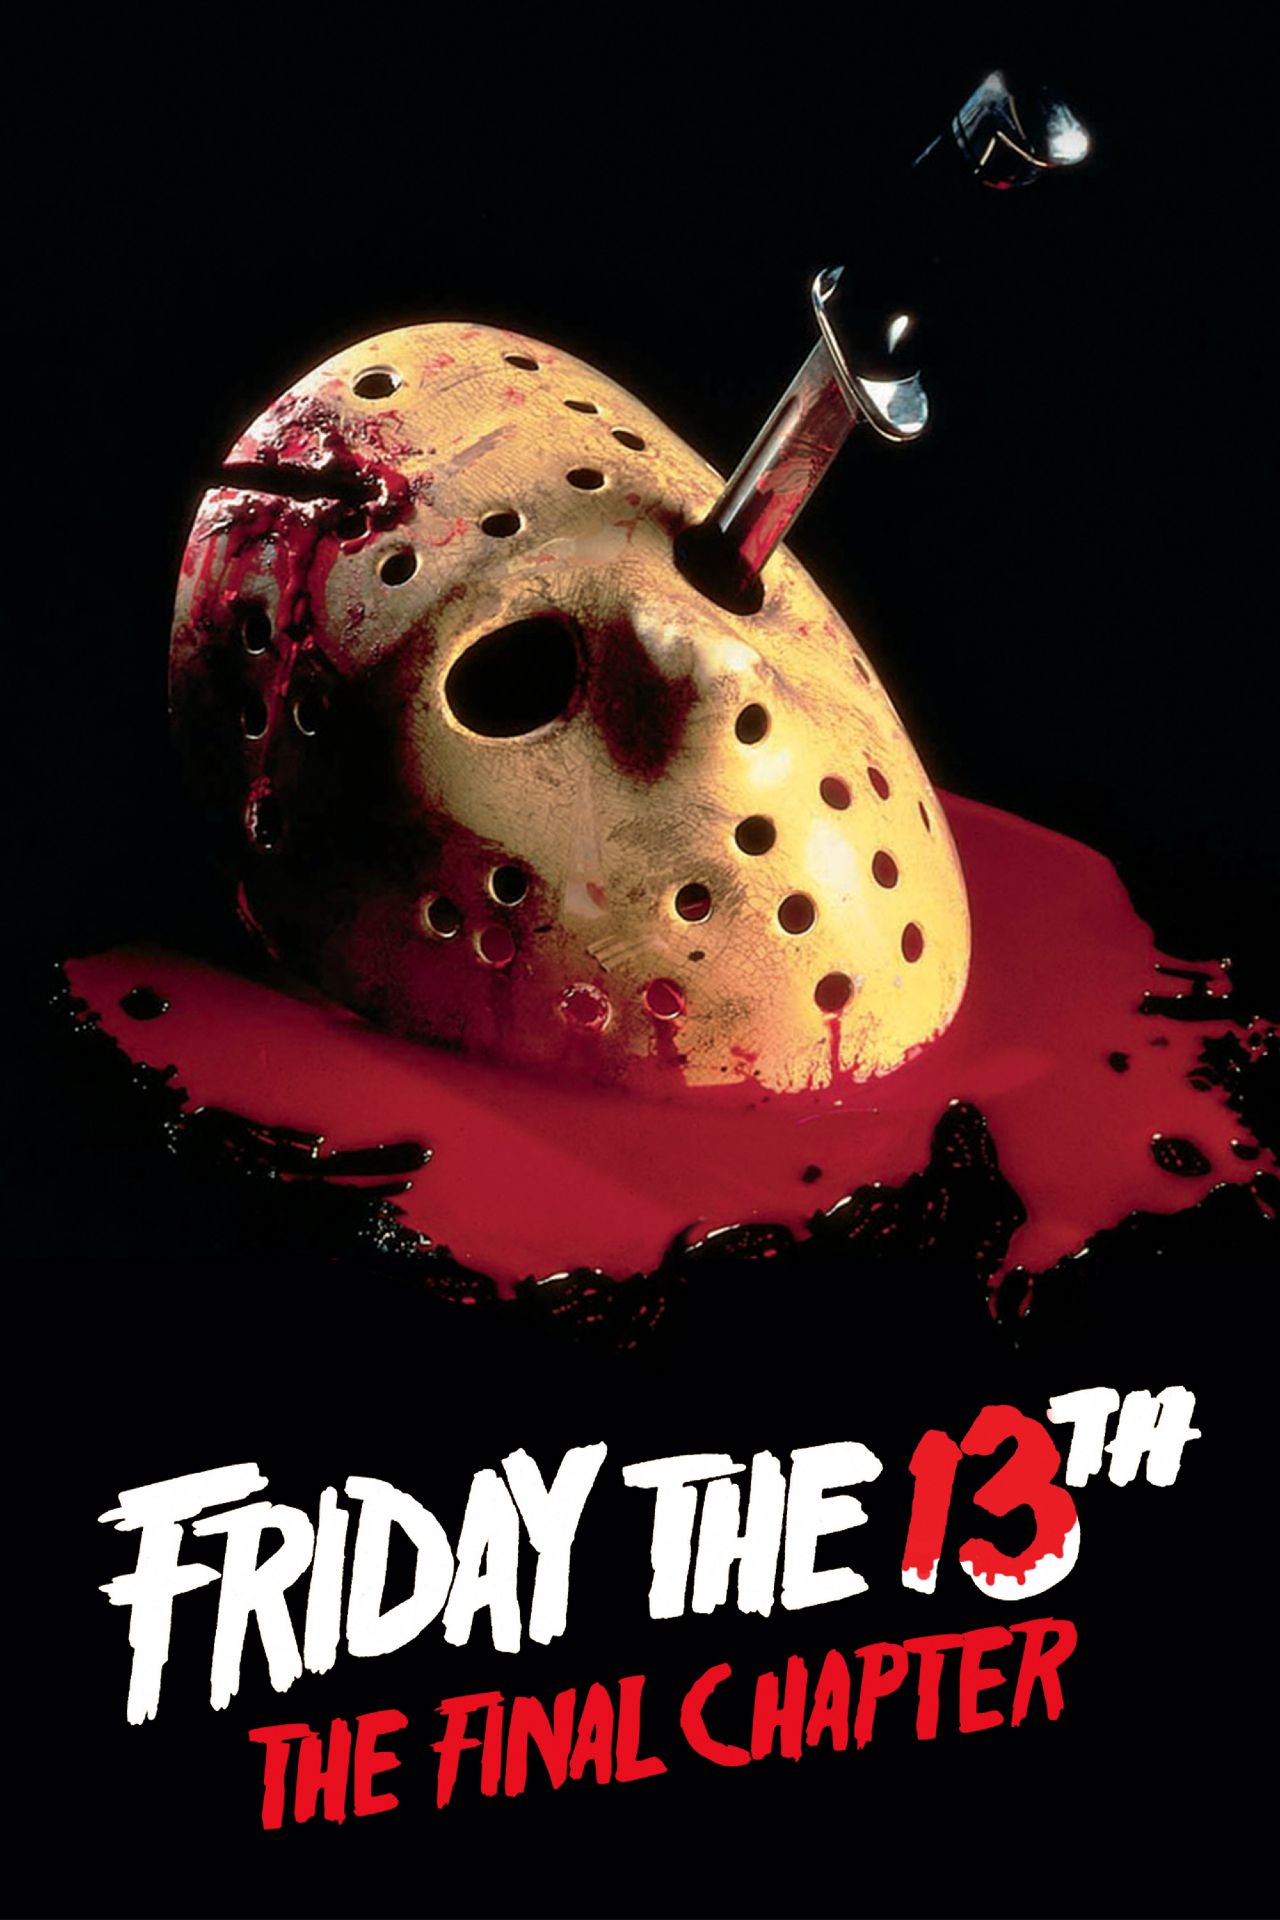 Friday the 13th the final chapter movie poster